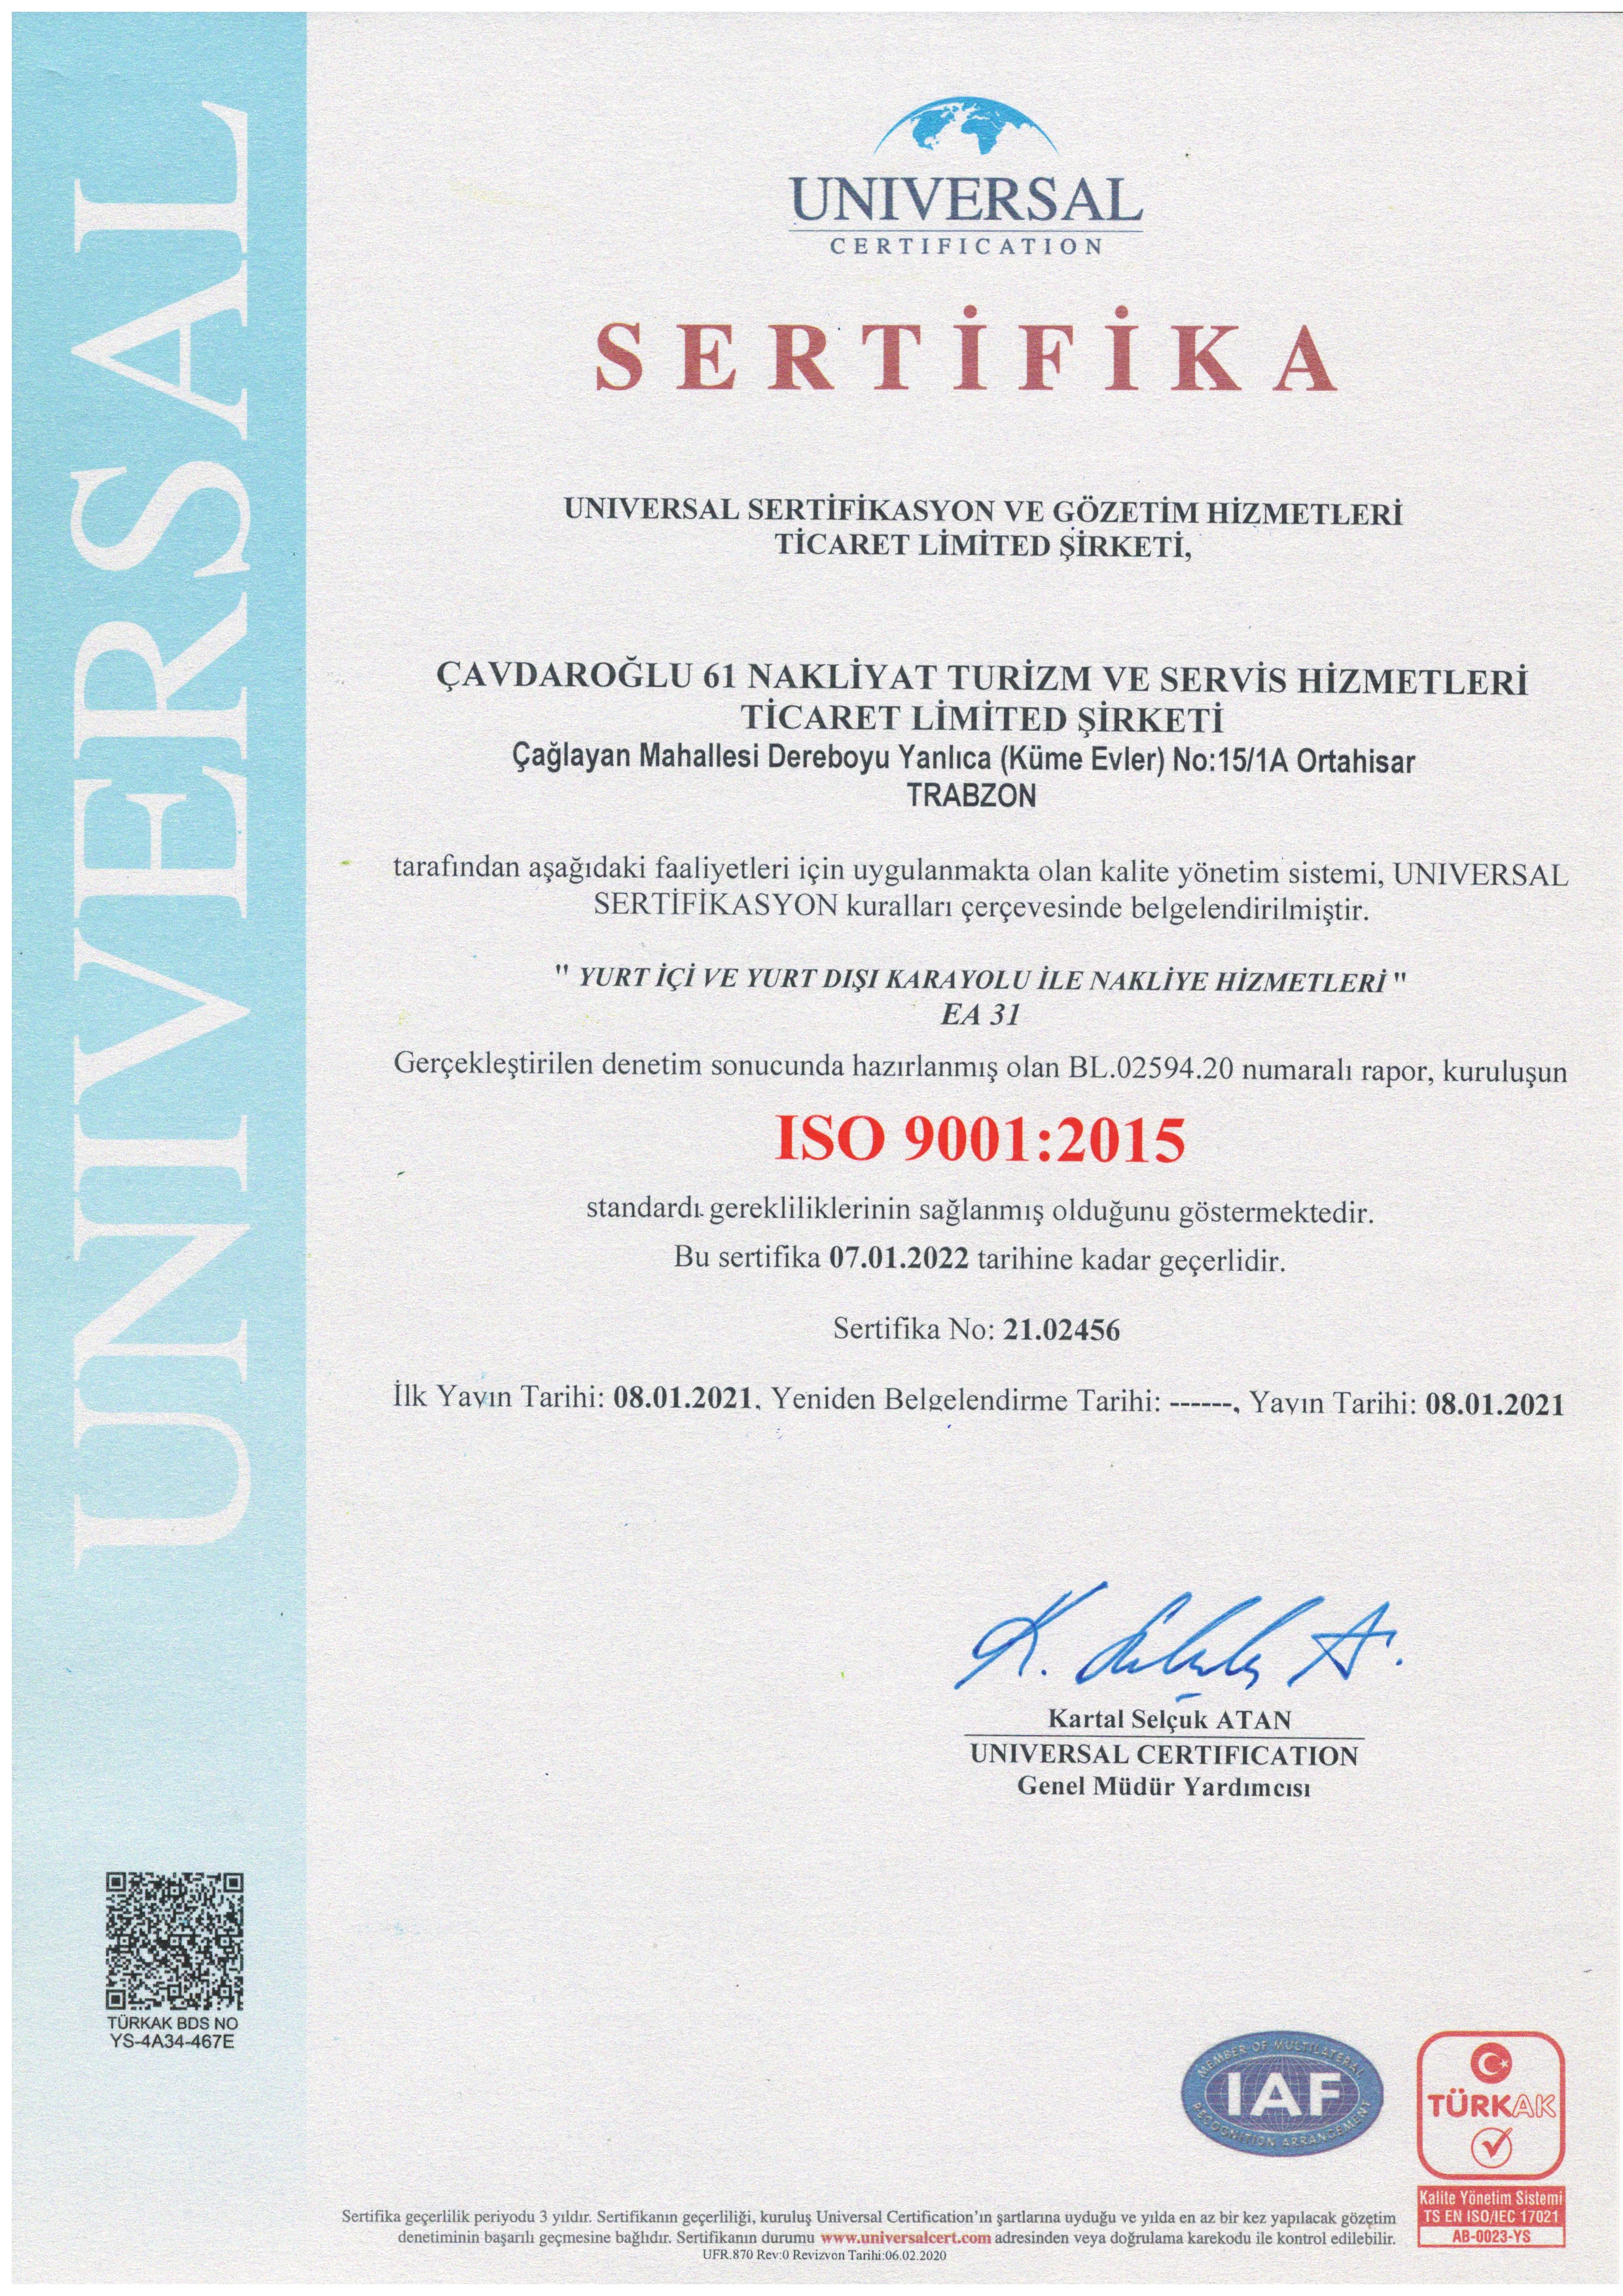 ISO 9001 QUALITY MANAGEMENT SYSTEM CERTIFICATE